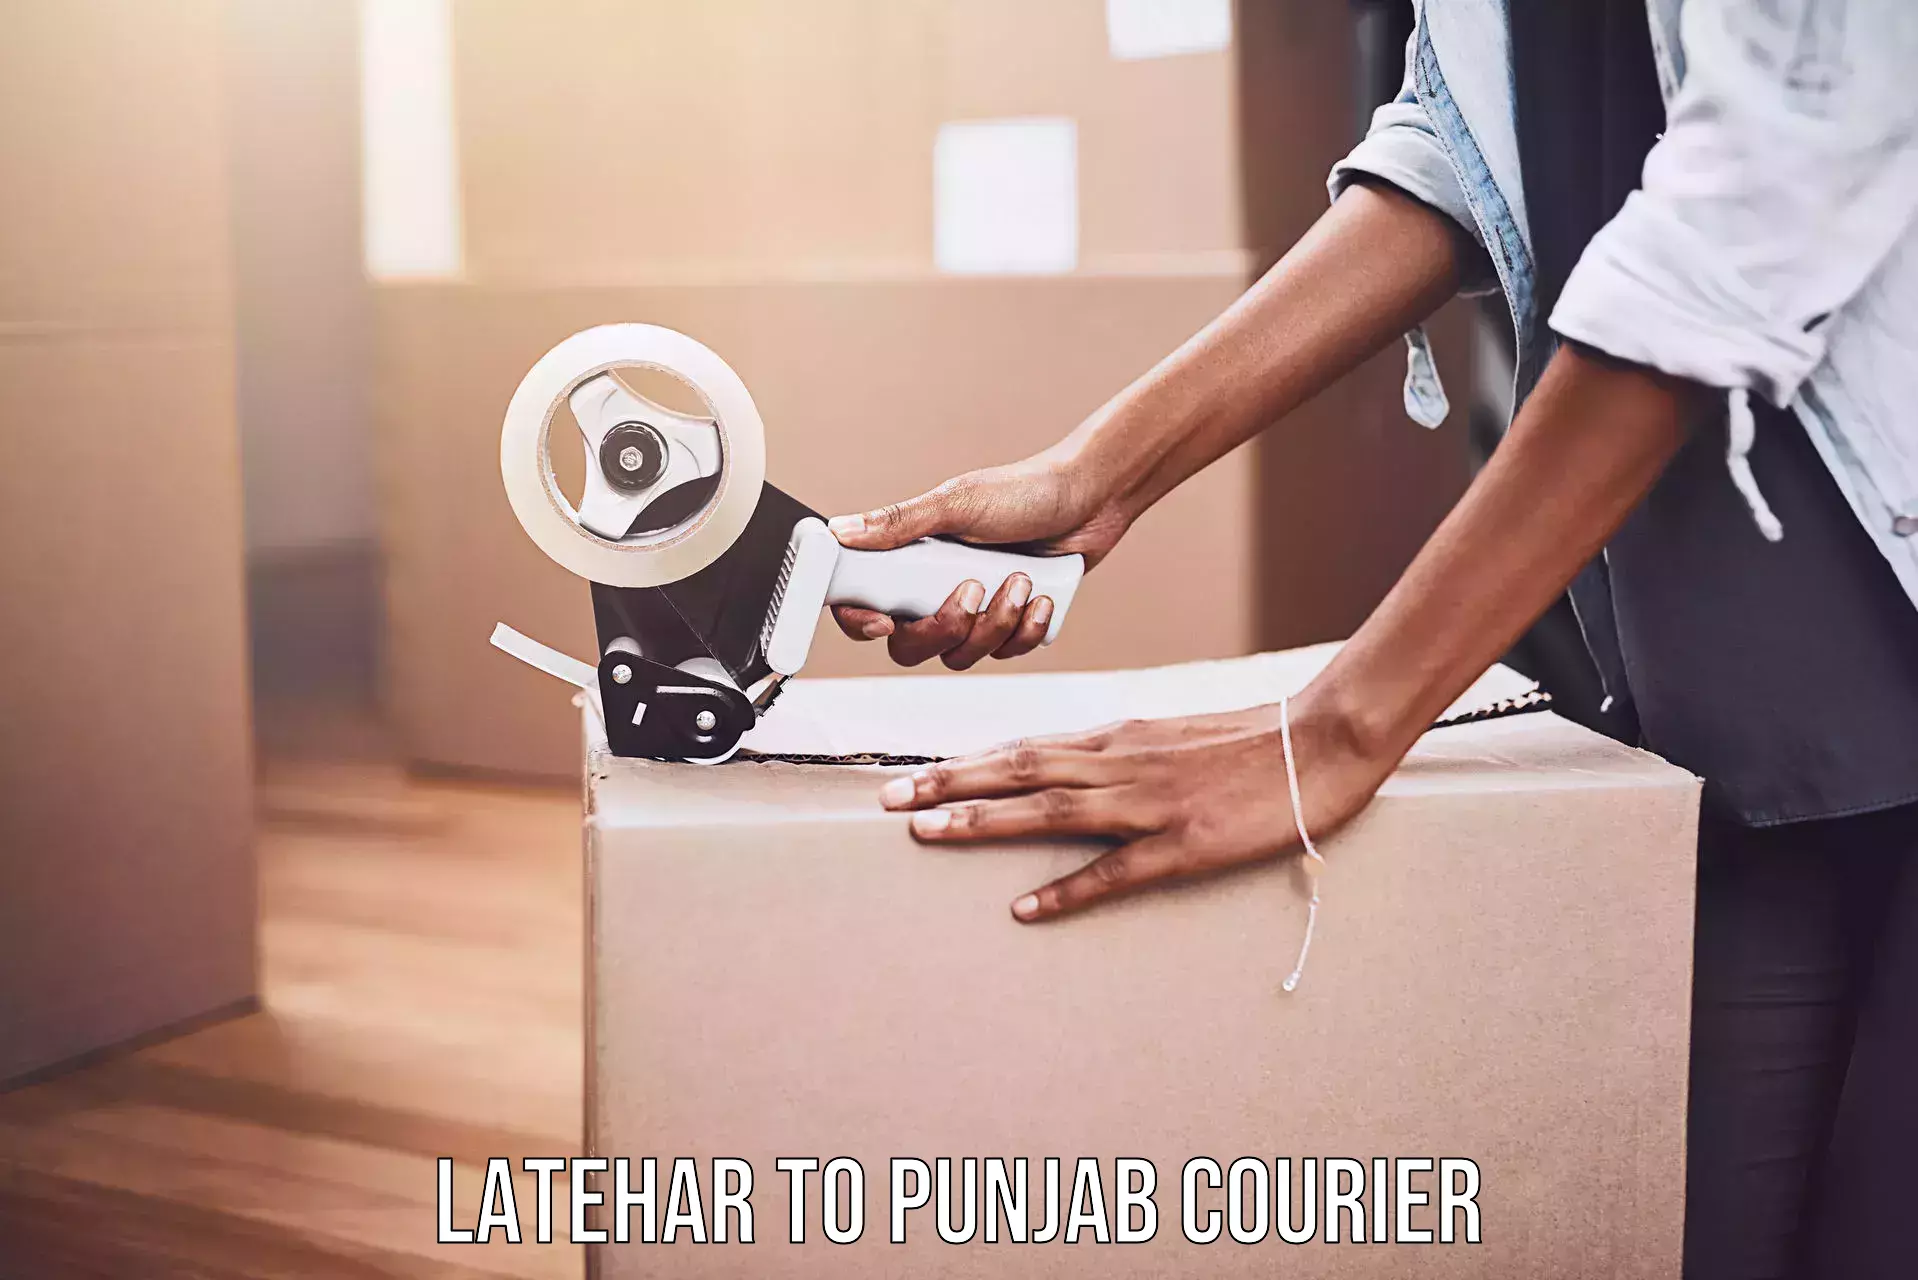 Quality courier partnerships Latehar to Mohali